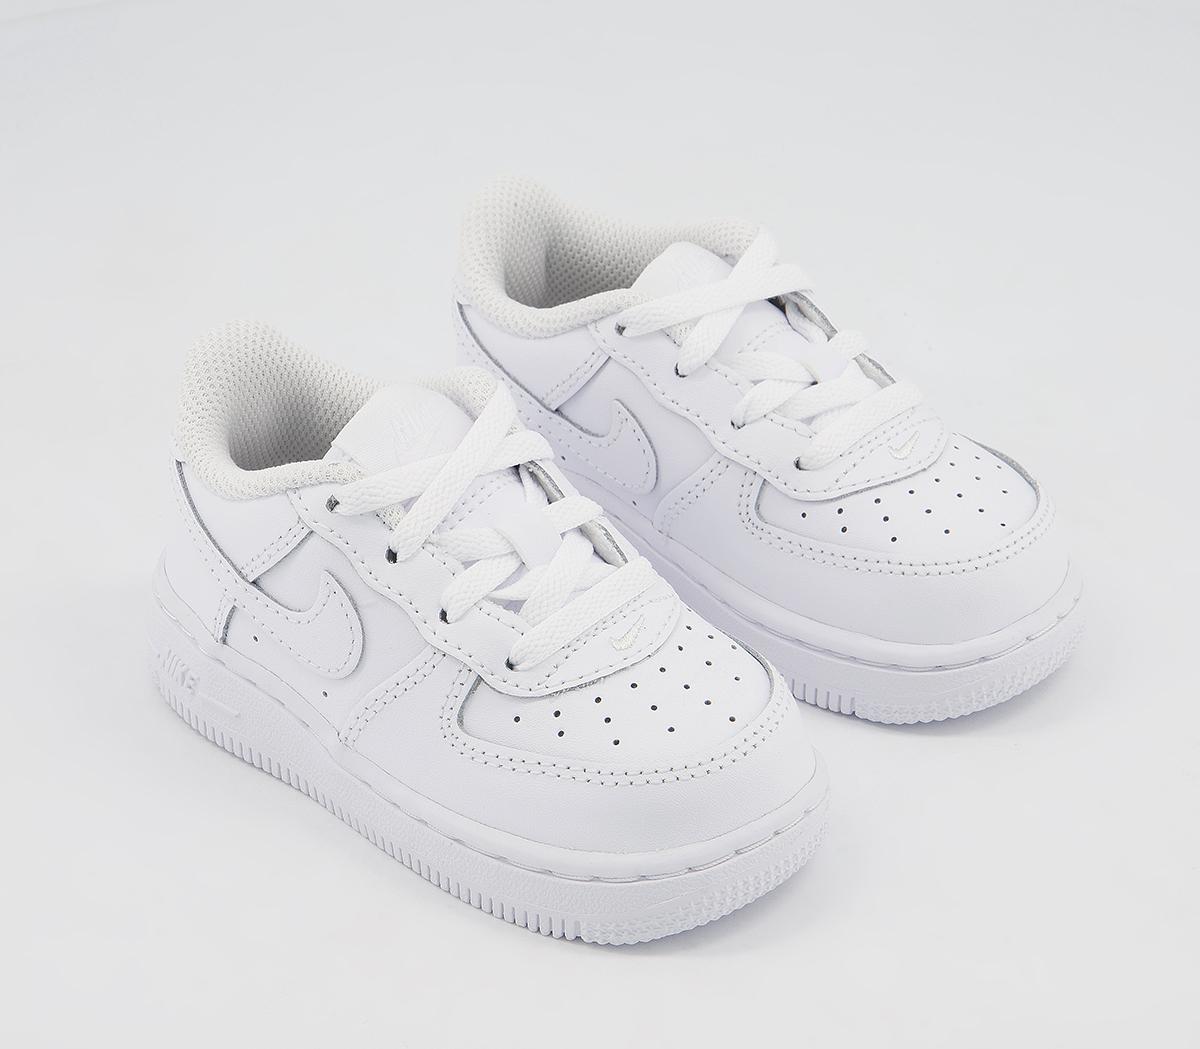 Nike Kids Air Force 1 Infant Trainers White, 6.5 Infant